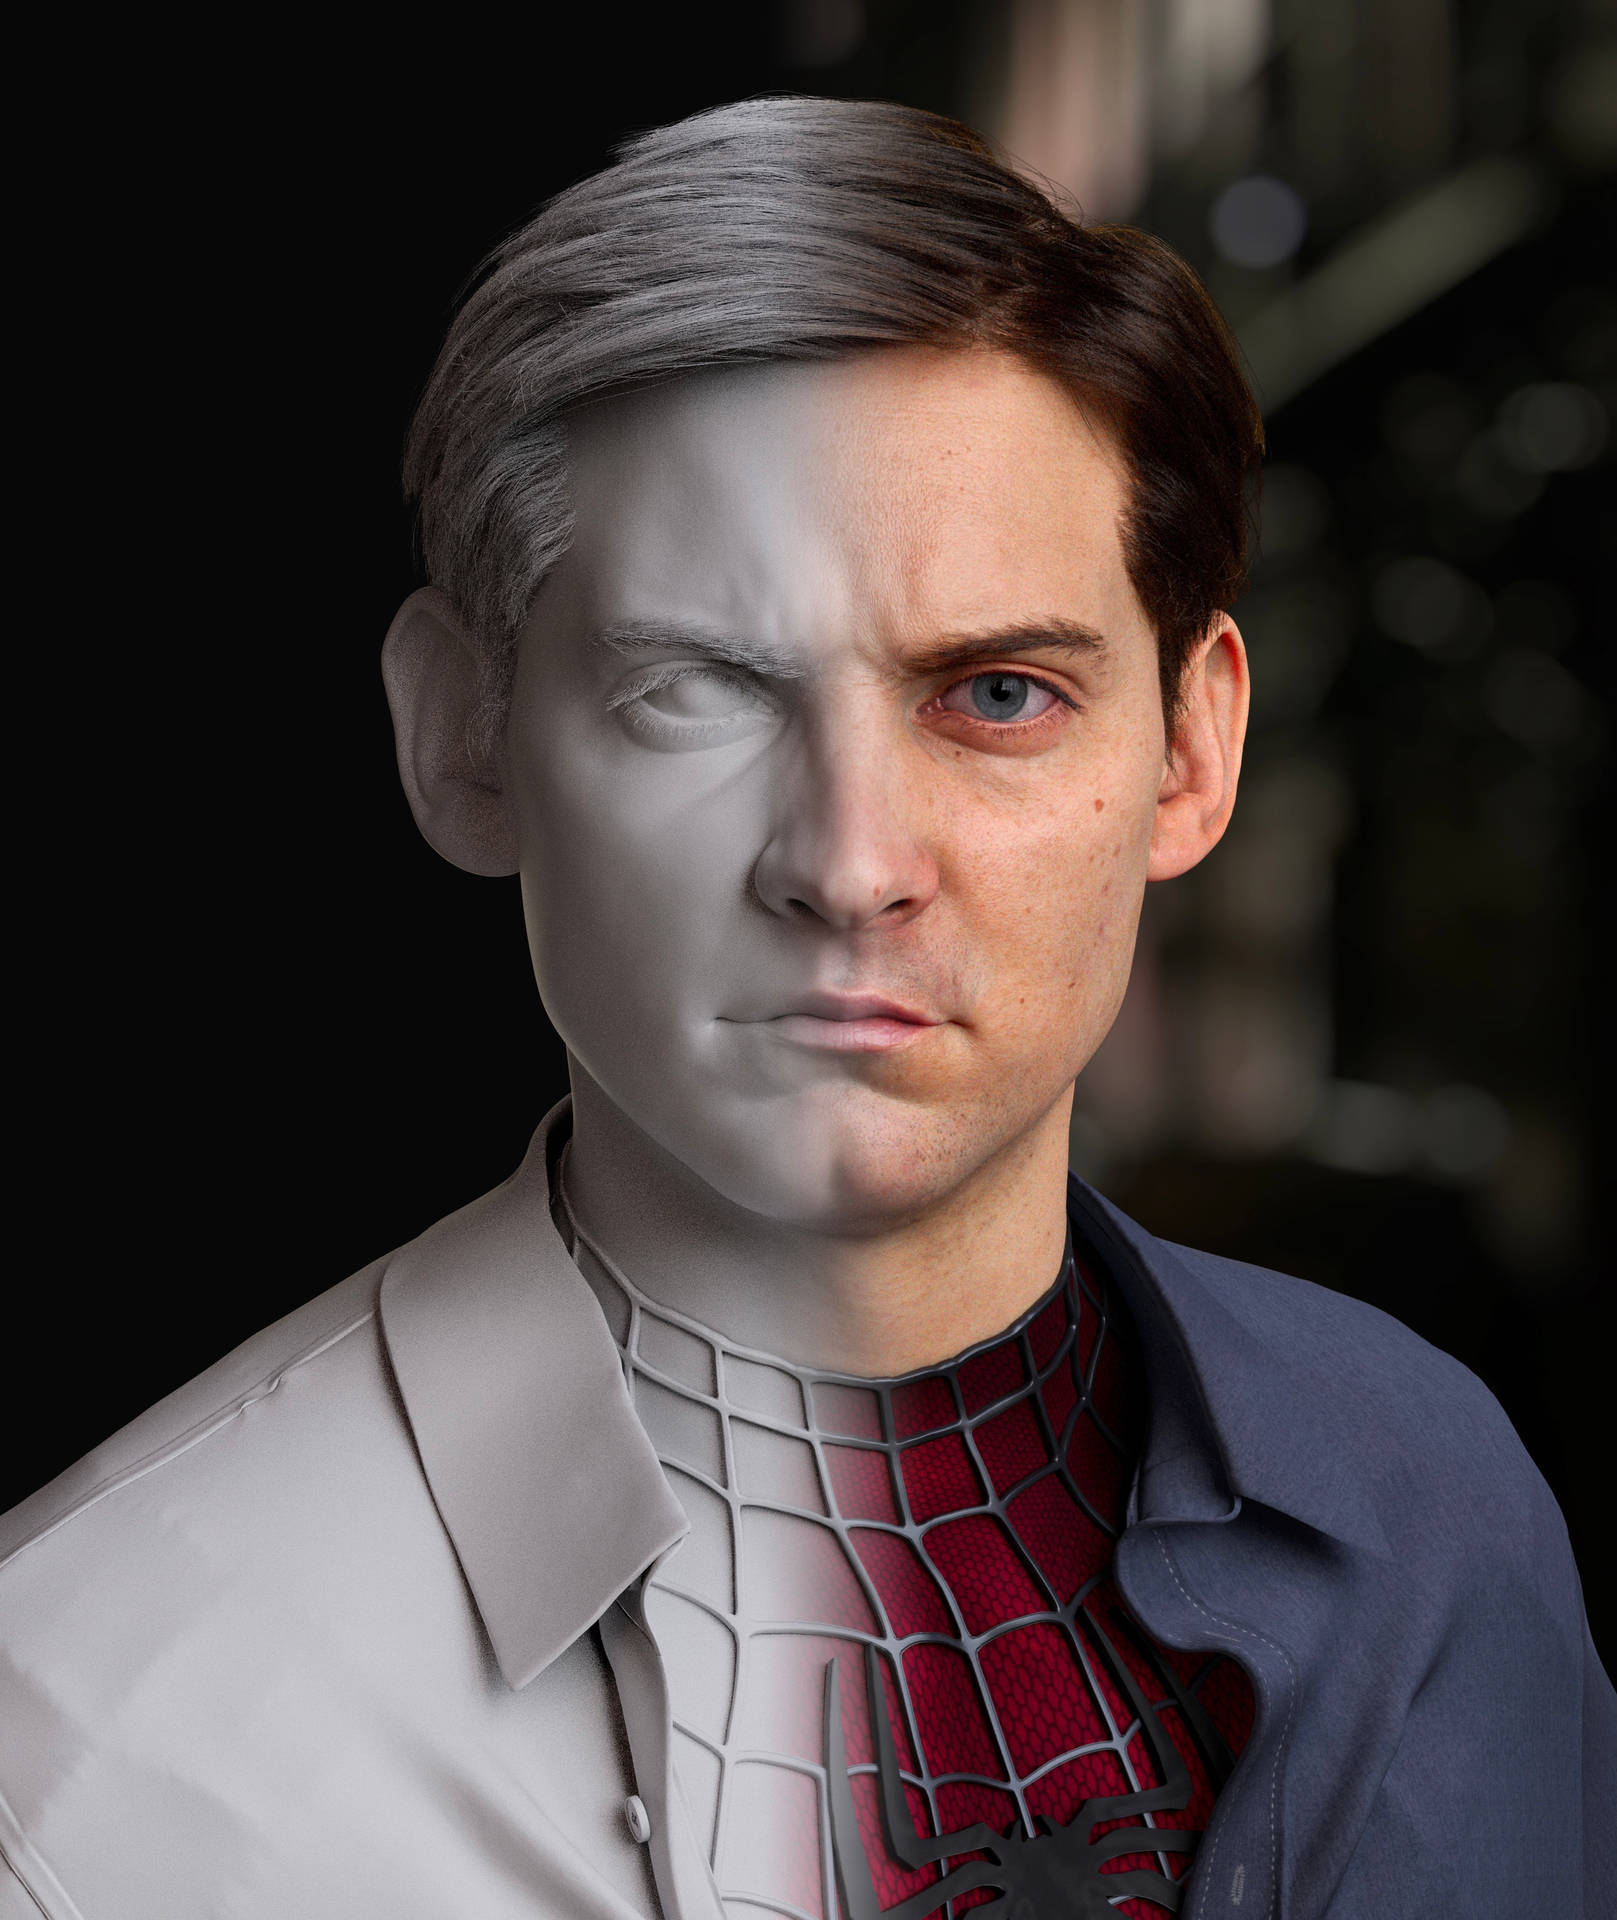 Spider-man Tobey 3d Is A Popular Computer Or Mobile Wallpaper Featuring The Iconic Character From The Spider-man Movie Series. It Showcases Tobey Maguire's Portrayal Of Spider-man In A Three-dimensional Format, Adding Depth And Realism To The Image. Spider-man Fans And Enthusiasts Of 3d Art Will Enjoy This Captivating Wallpaper Option For Their Devices. Wallpaper